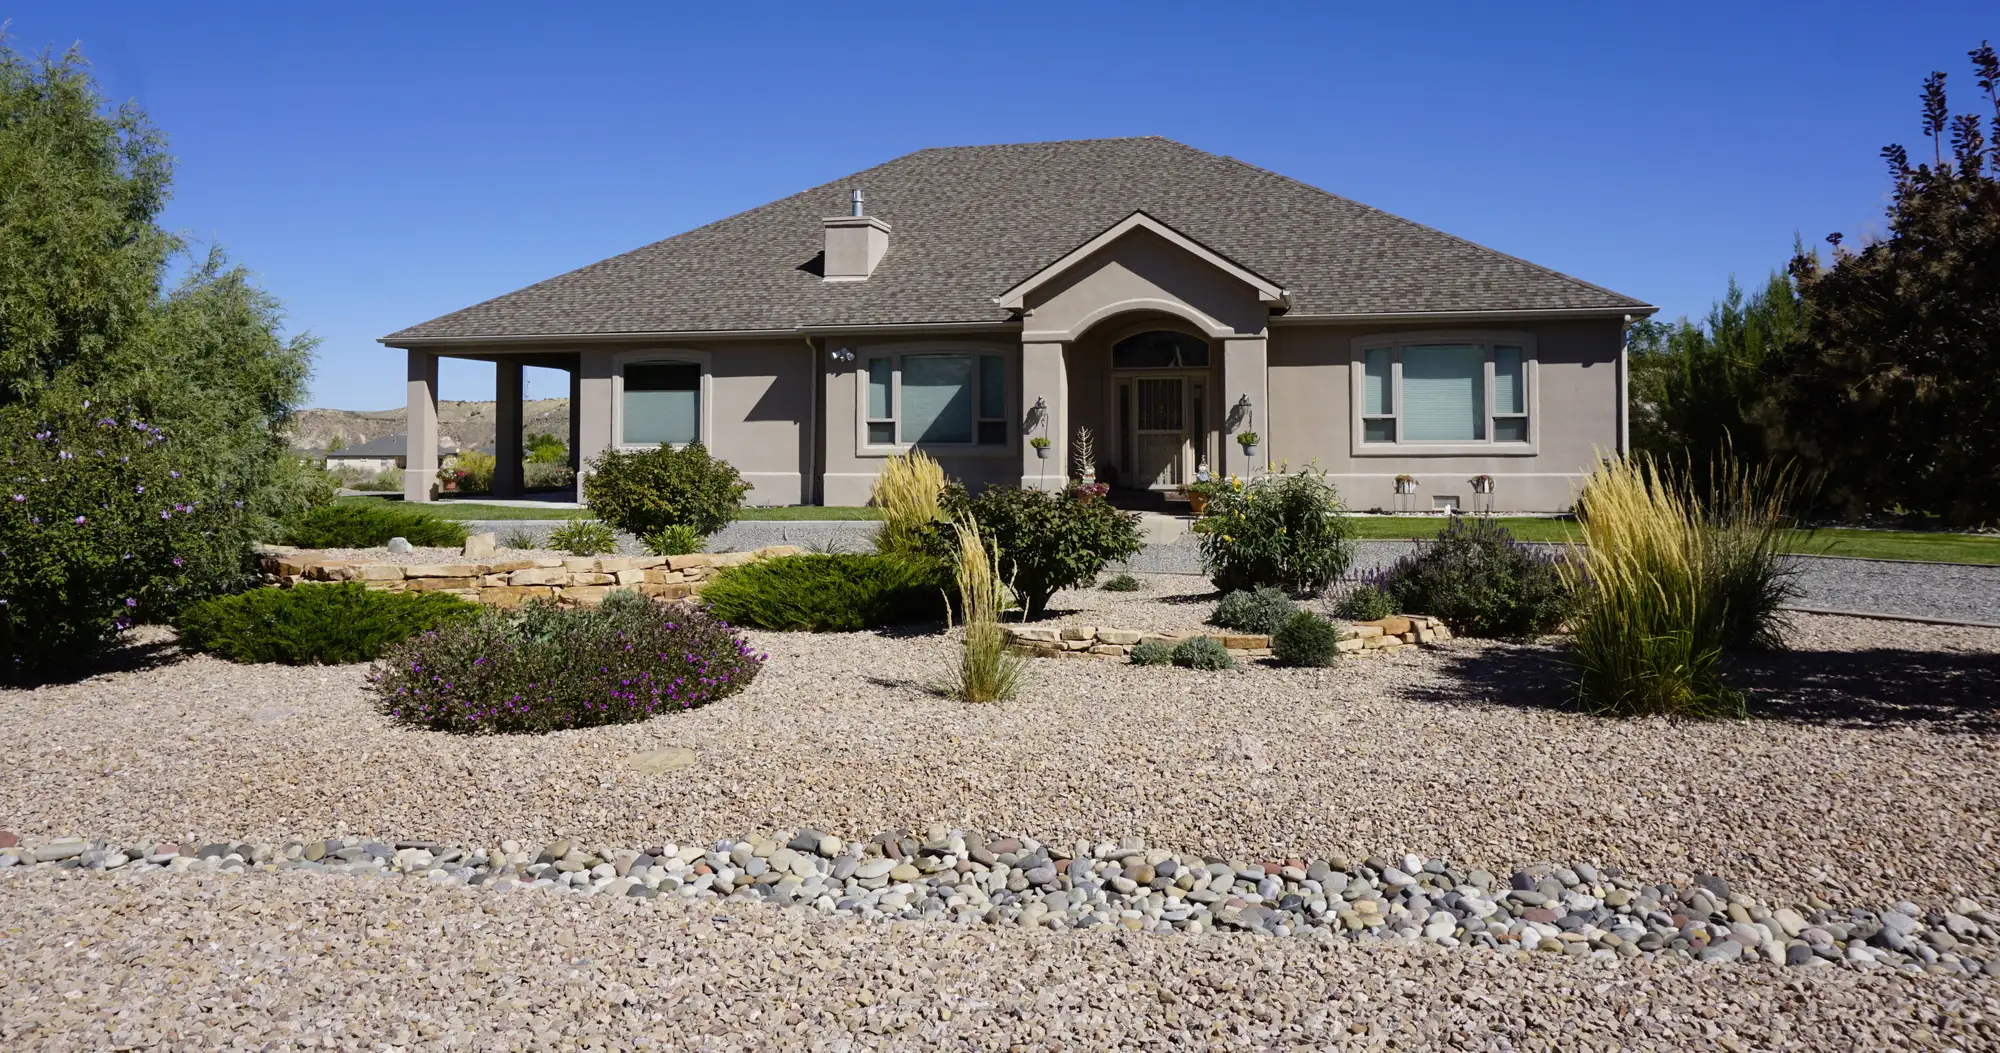 Difference Between Xeriscape and Zeroscape